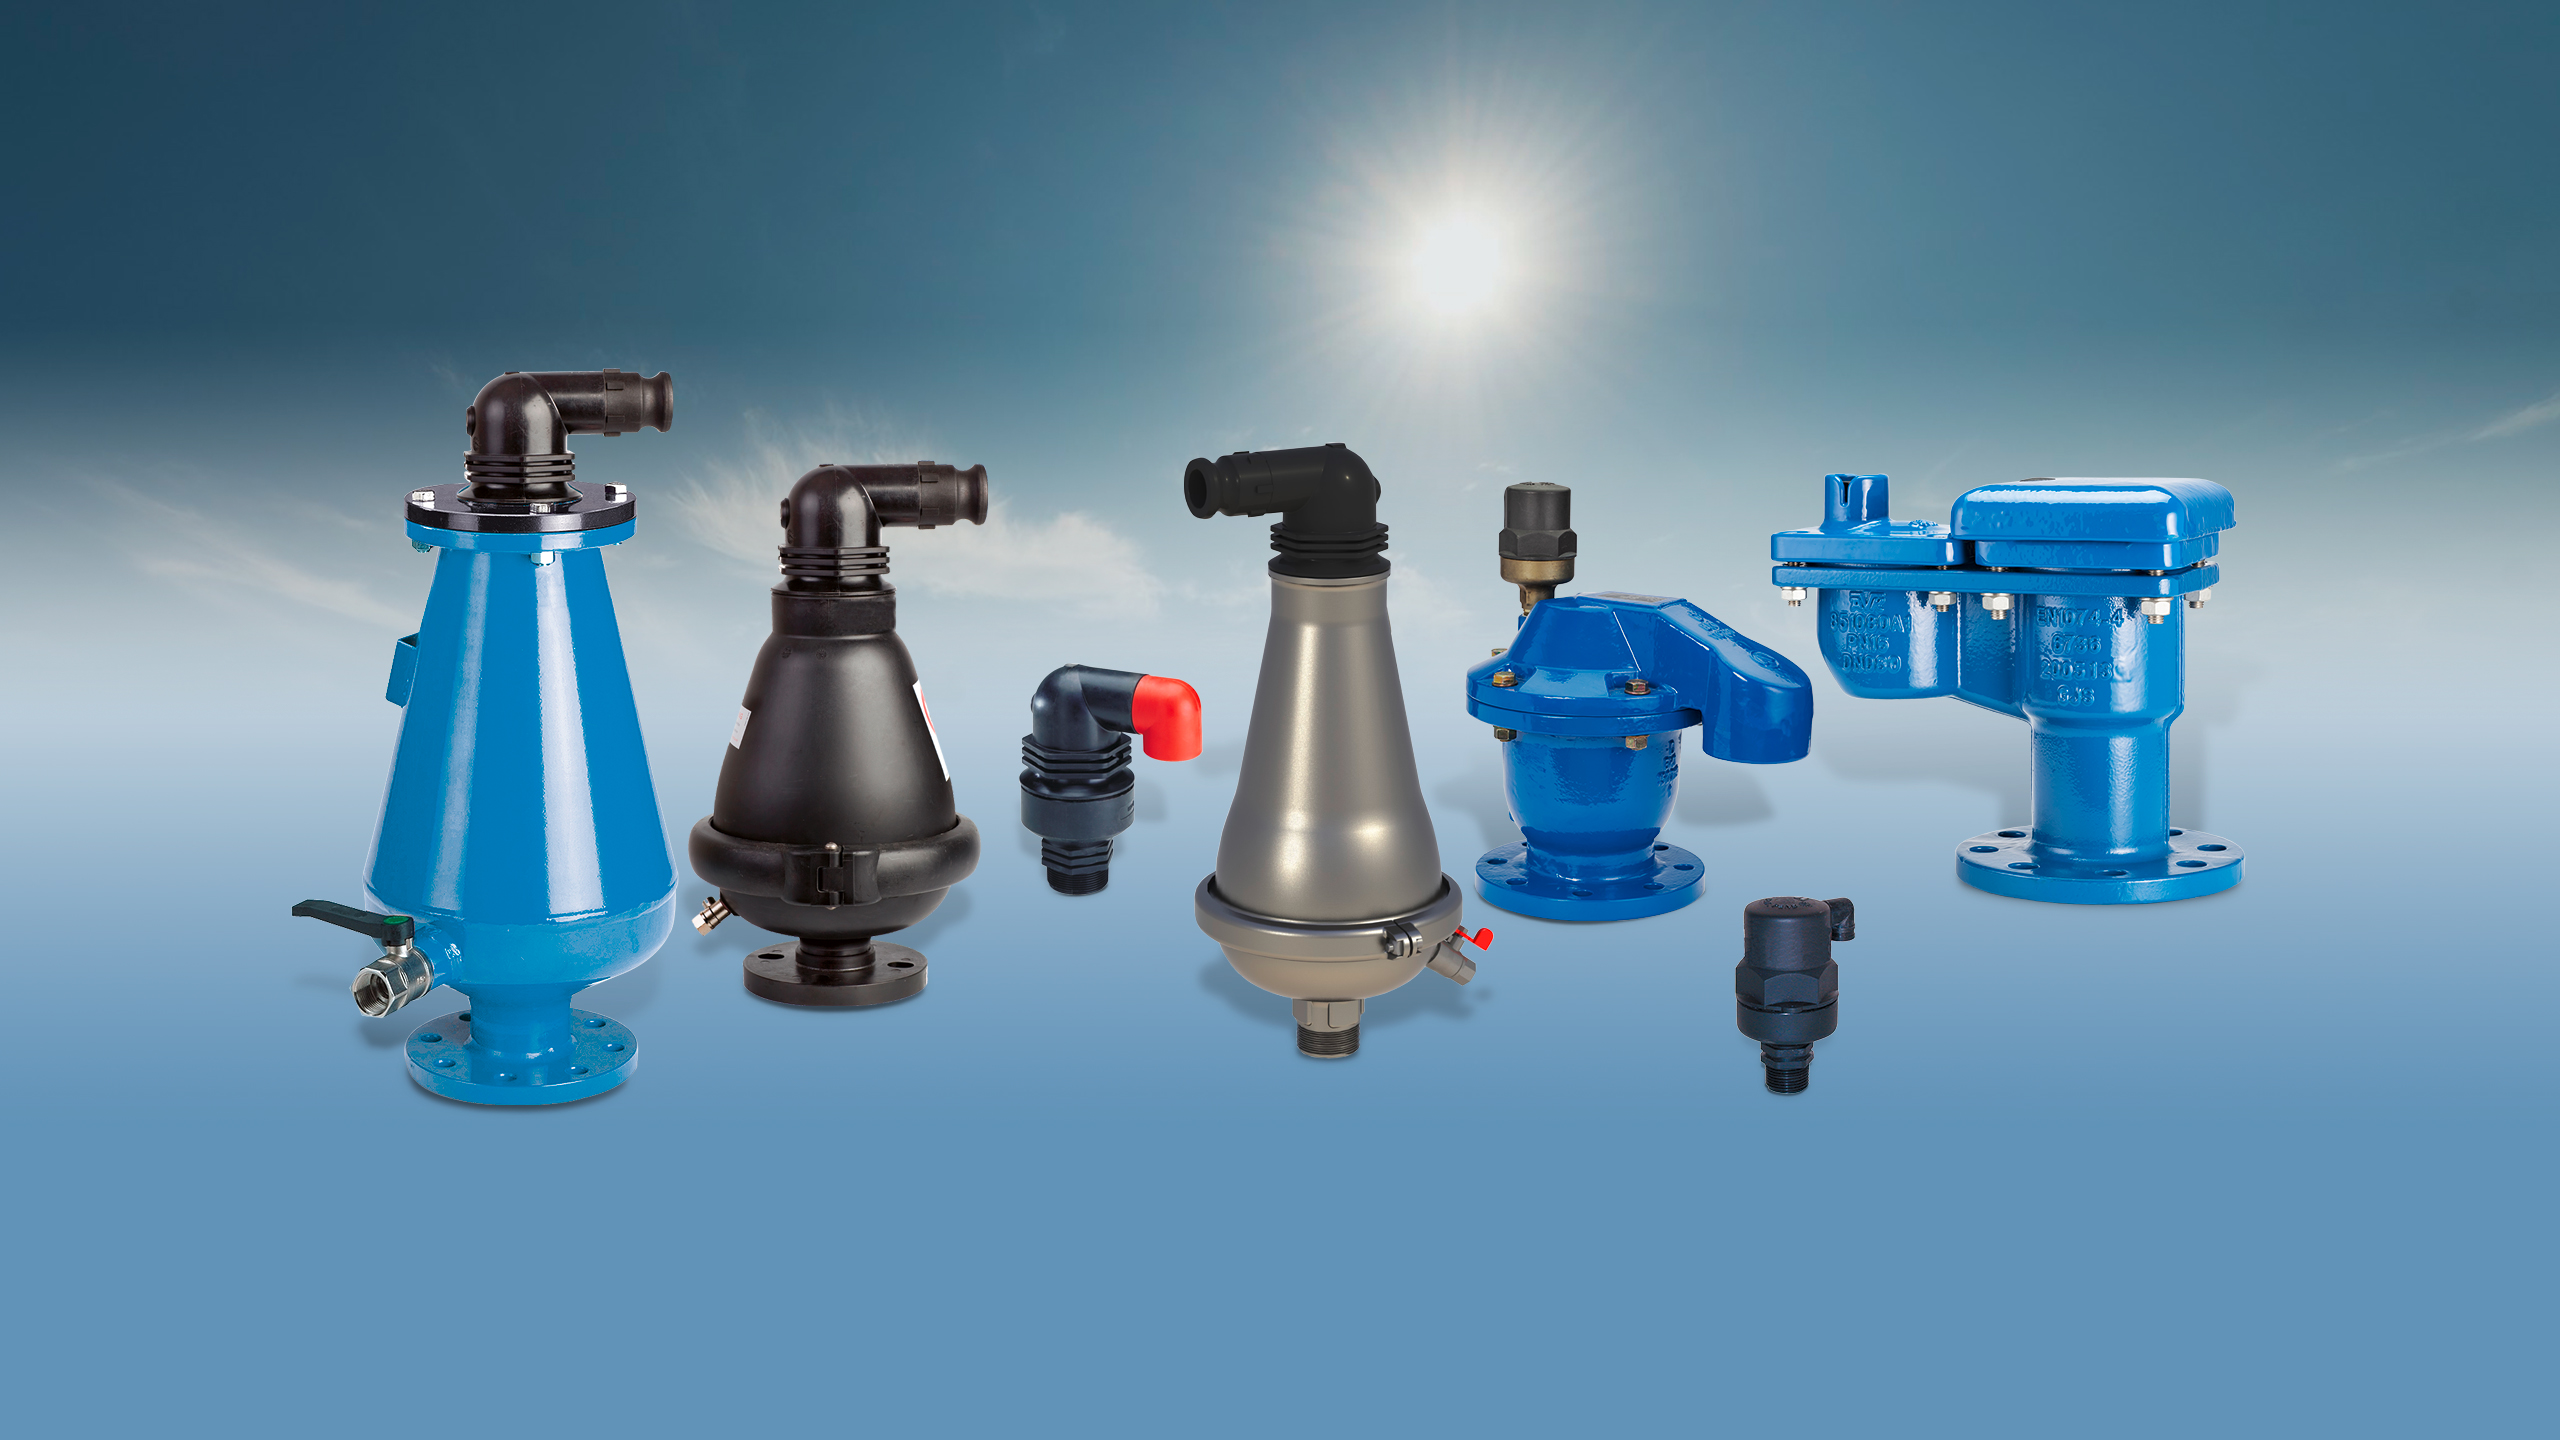 AVK air valves designed for water and wastewater applications